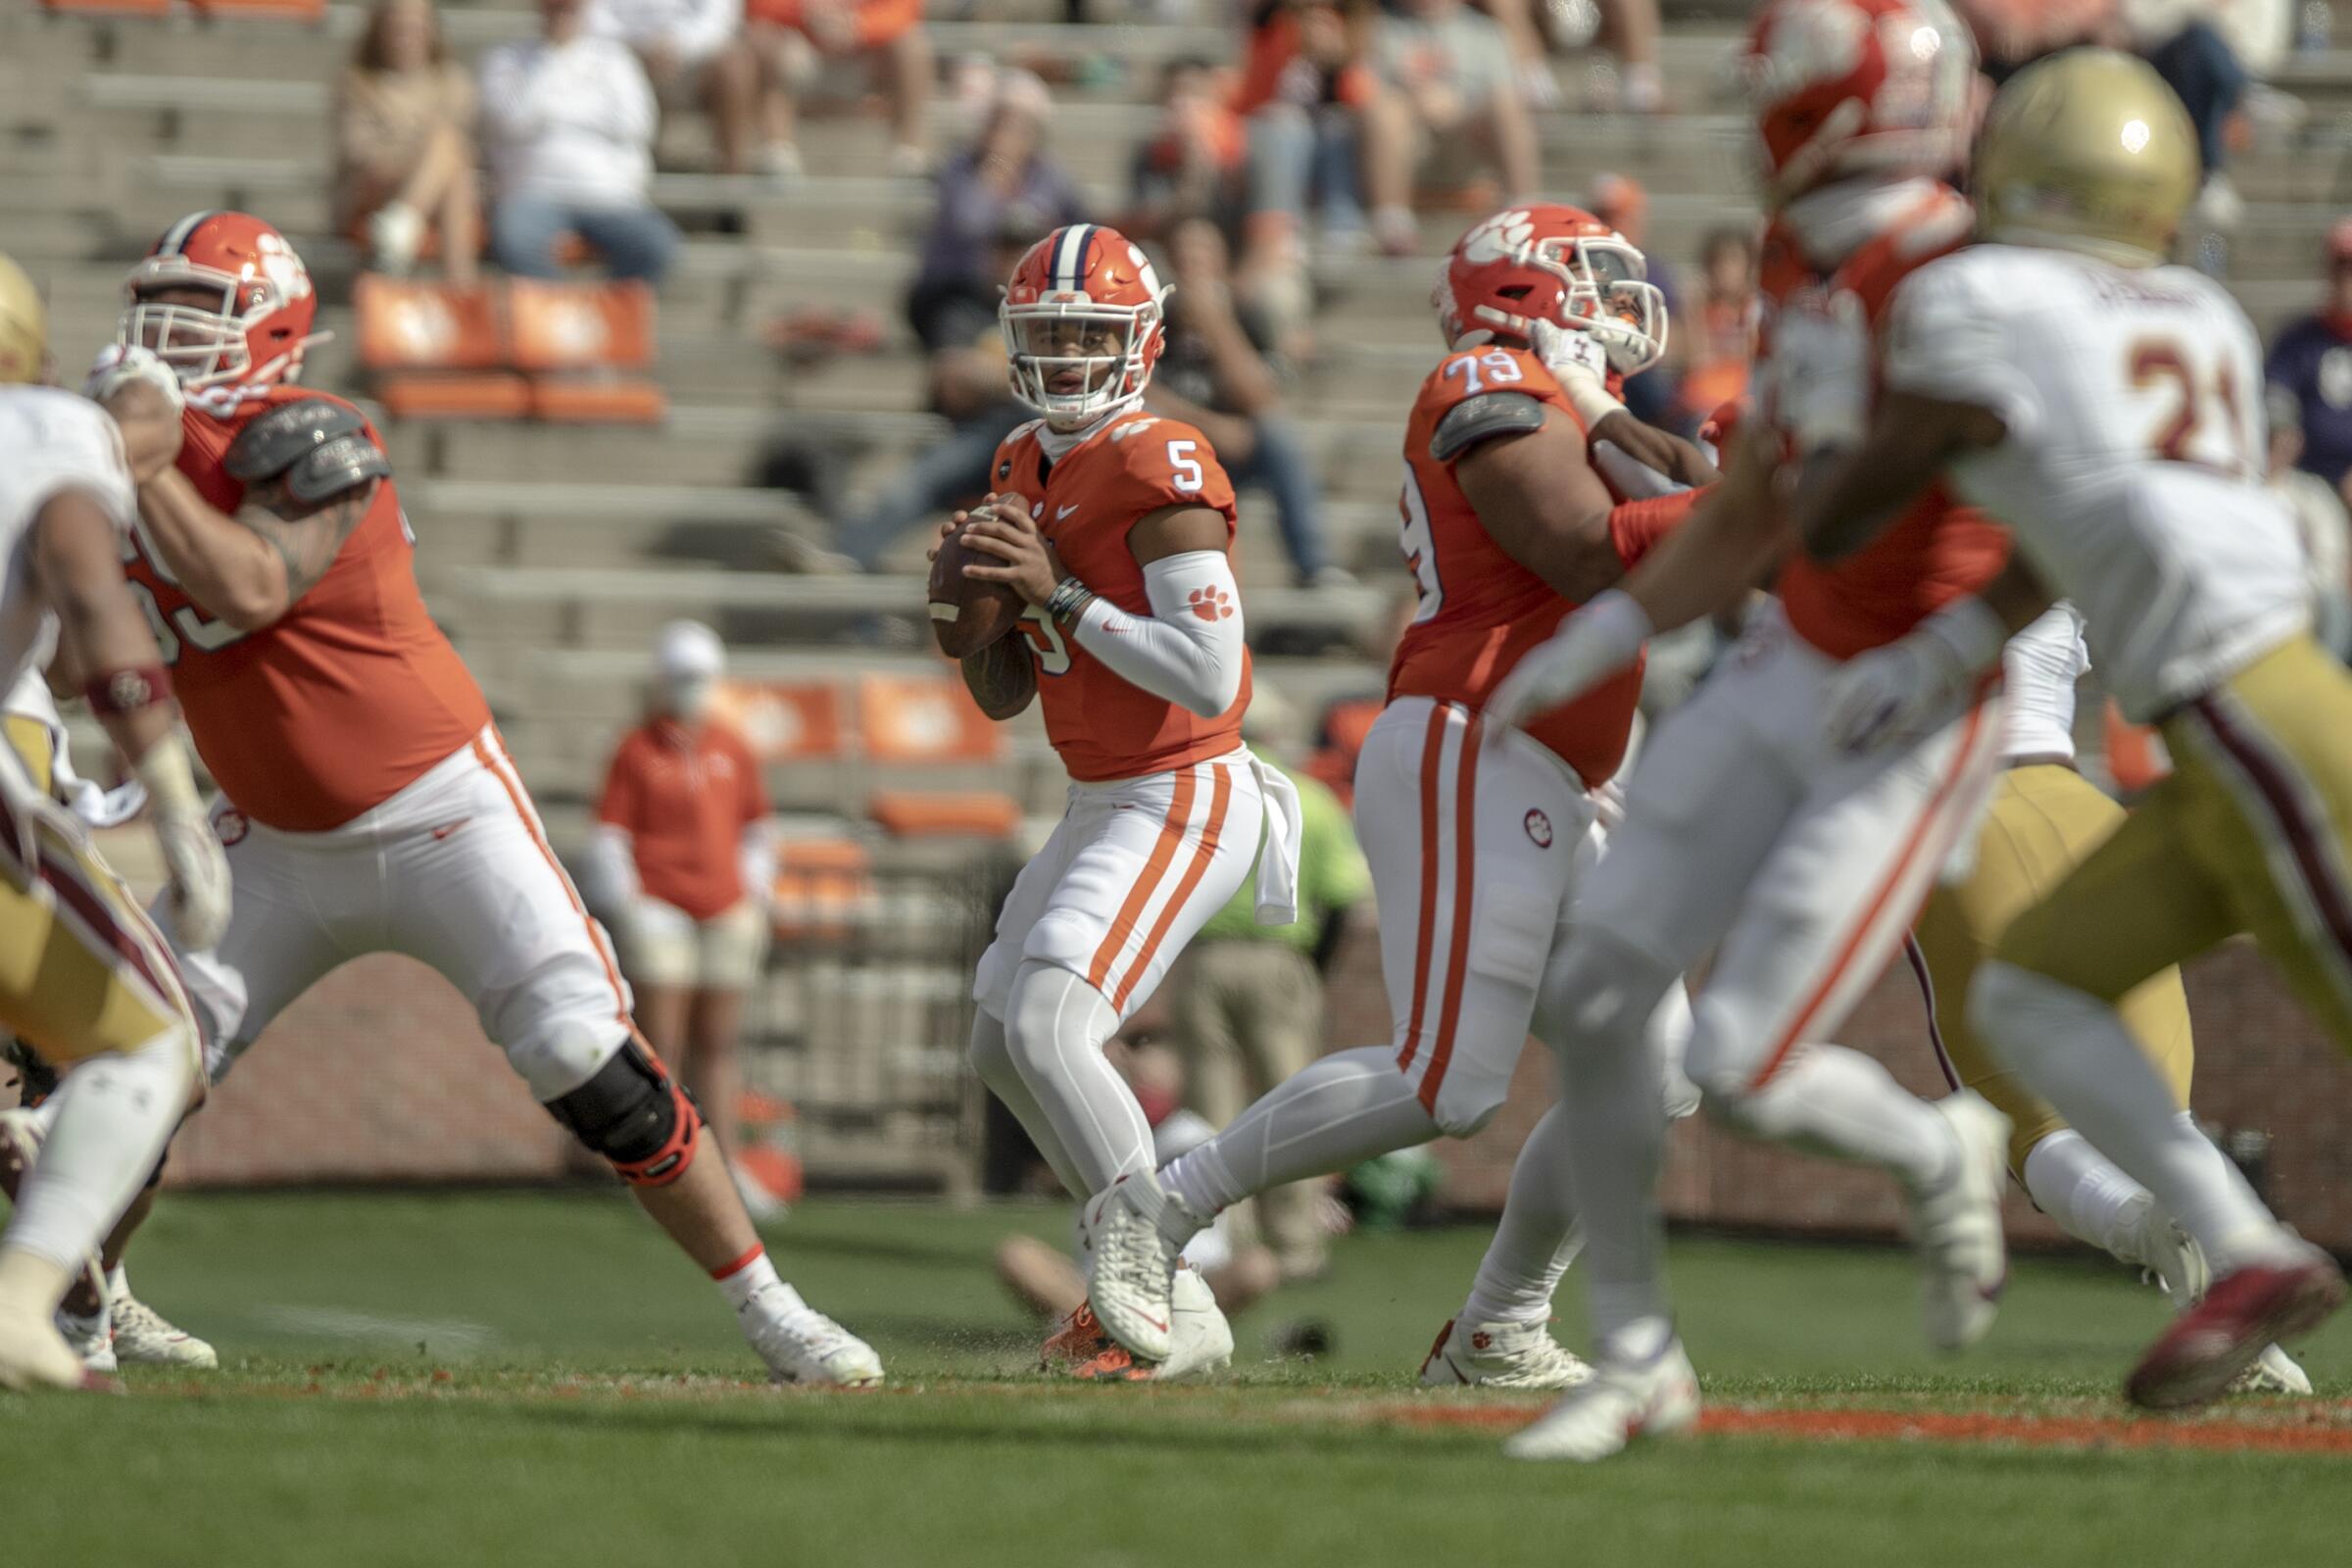 Clemson quarterback D.J. Uiagalelei drops back to pass during a game against Boston College on Oct. 31.